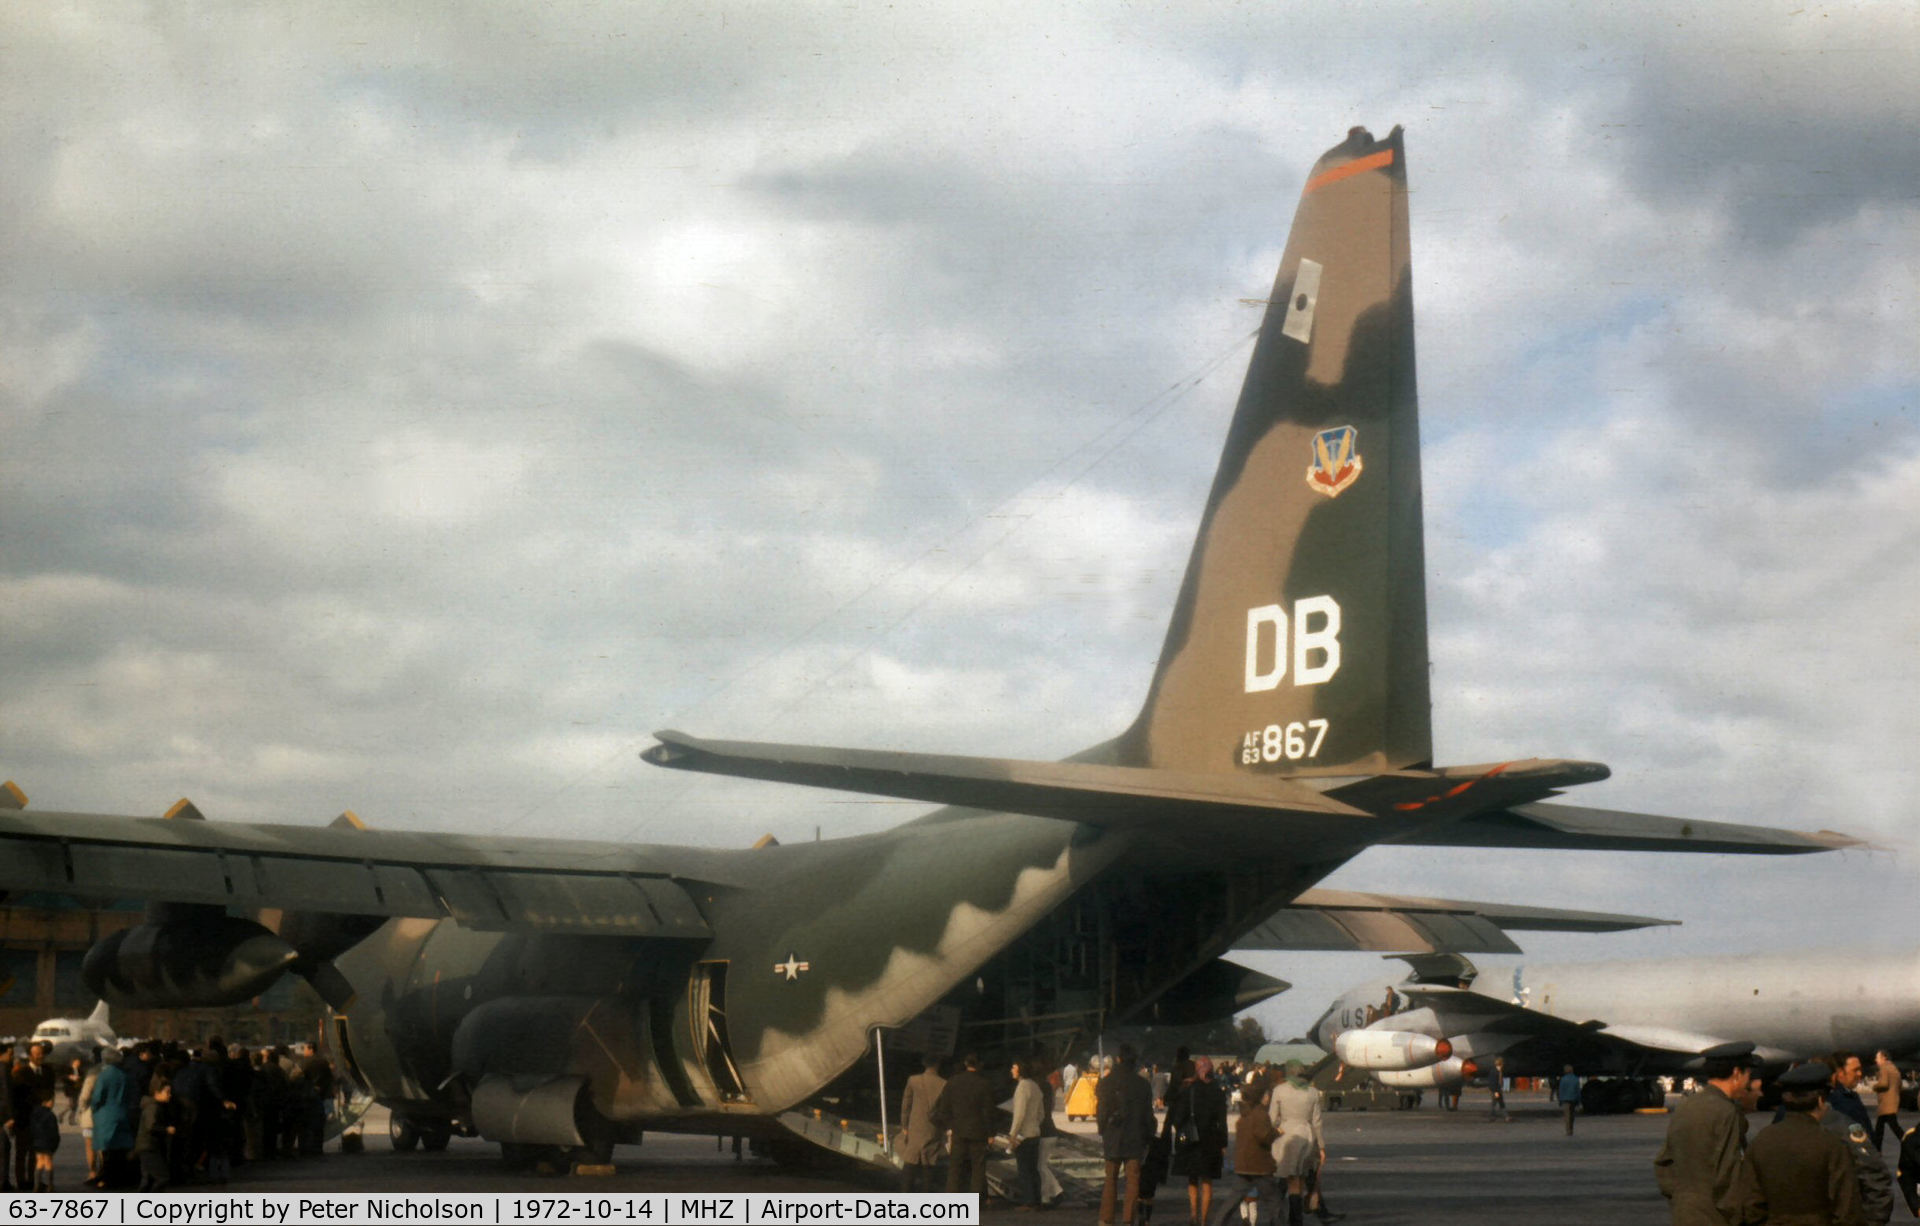 63-7867, 1963 Lockheed C-130E Hercules C/N 382-3937, C-130E Hercules of the 463rd Tactical Airlift Wing at Dyess AFB on display at the 1972 RAF Mildenhall Air Fete.